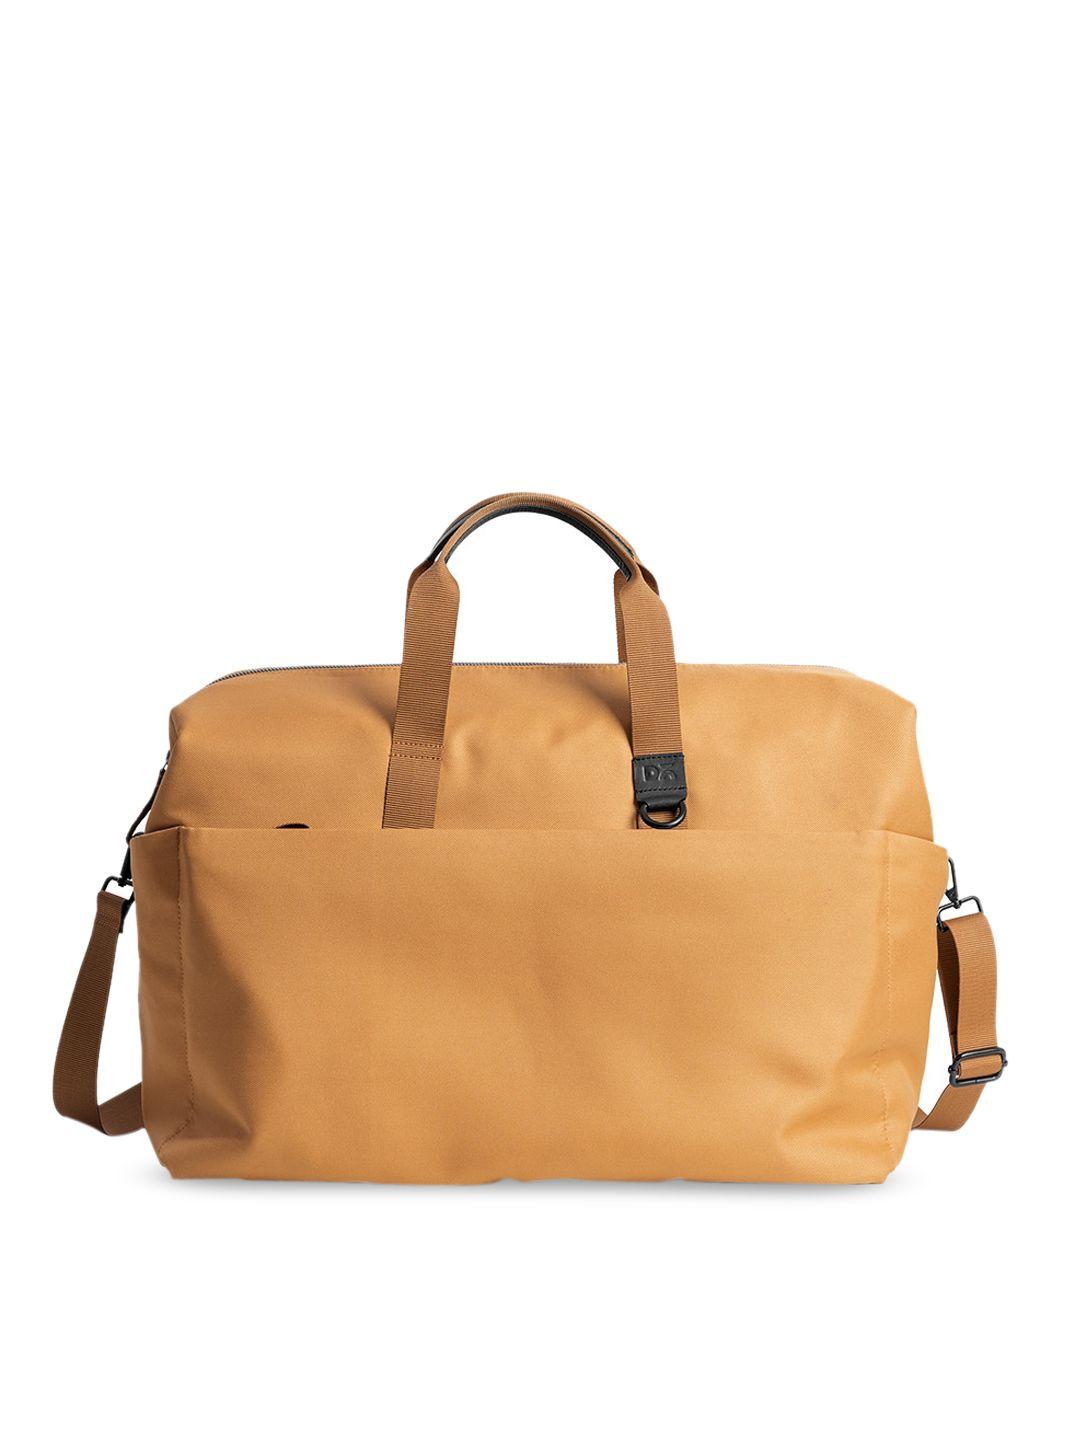 dailyobjects 100% recycled amber gravity travel duffle bag